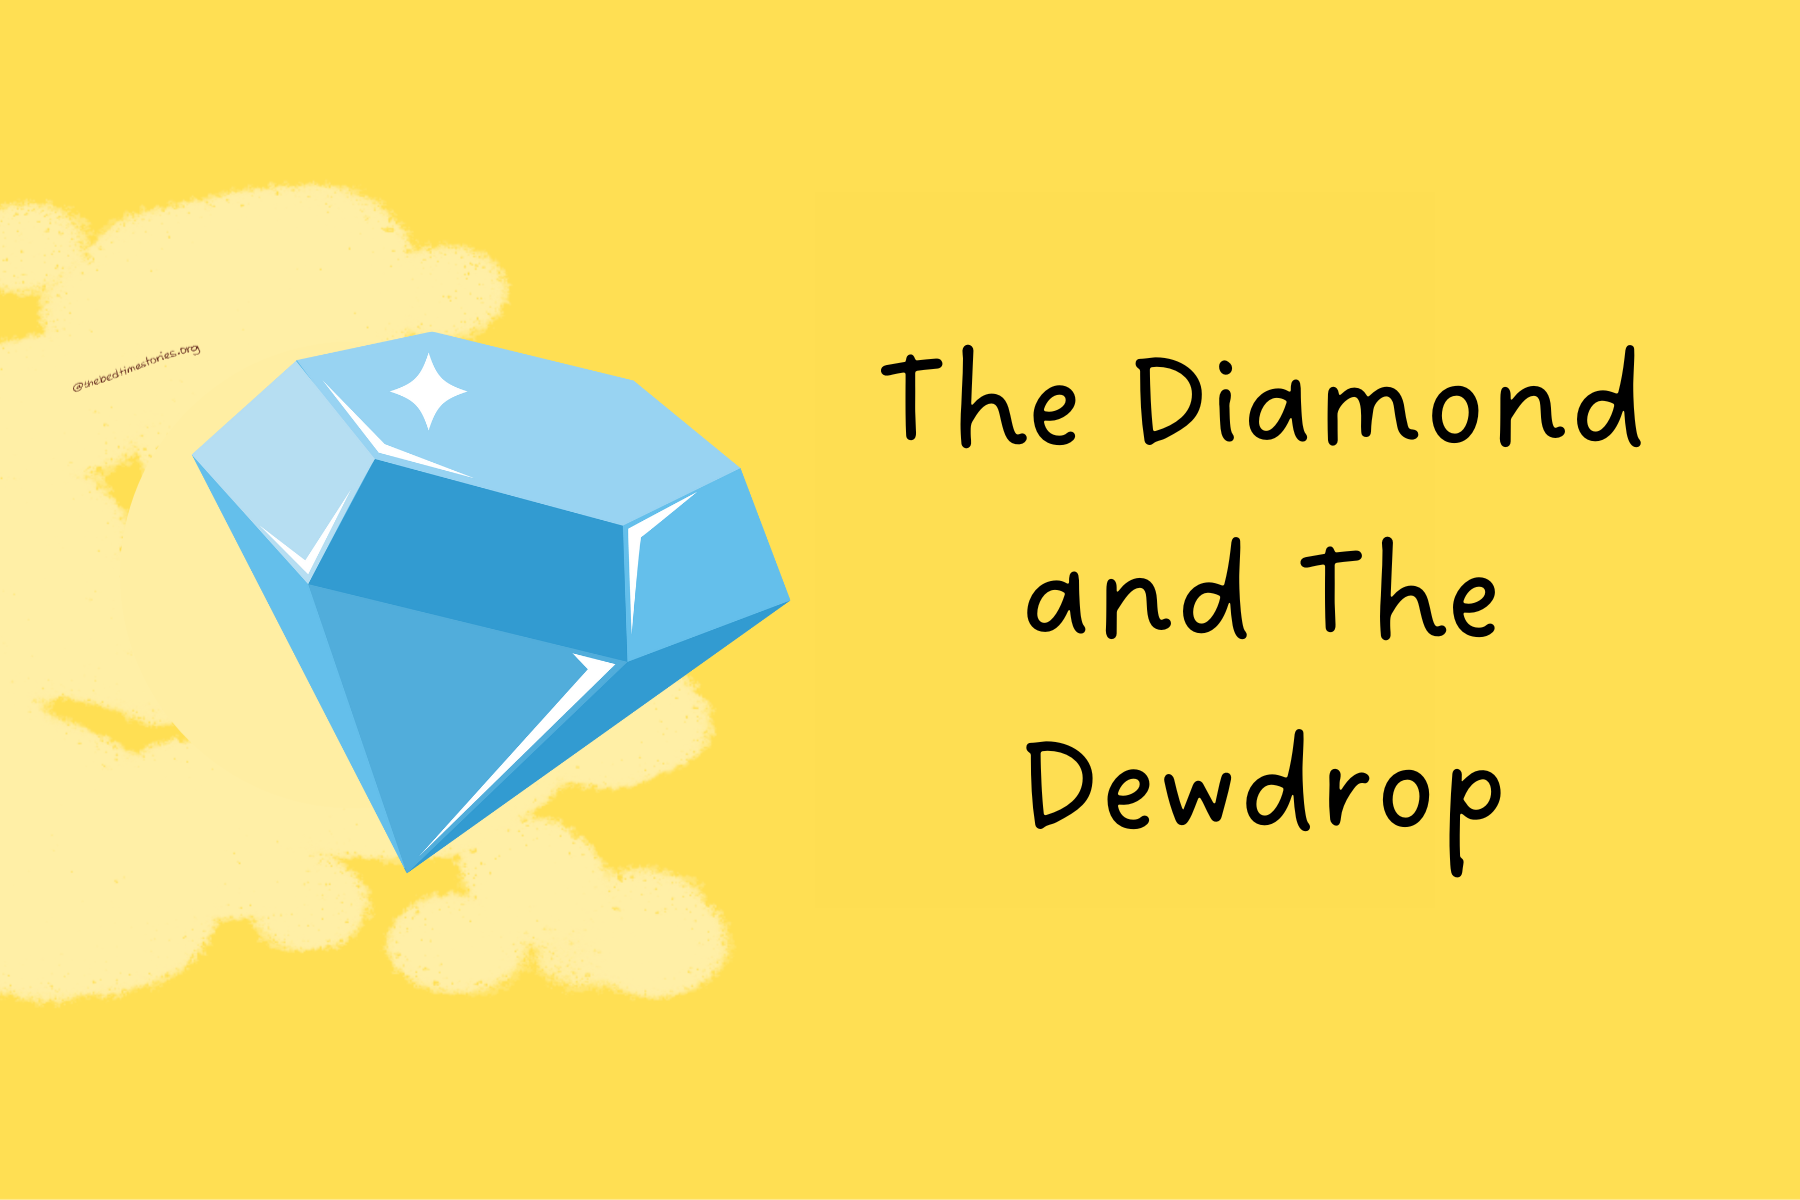 The Diamond and the Dewdrop